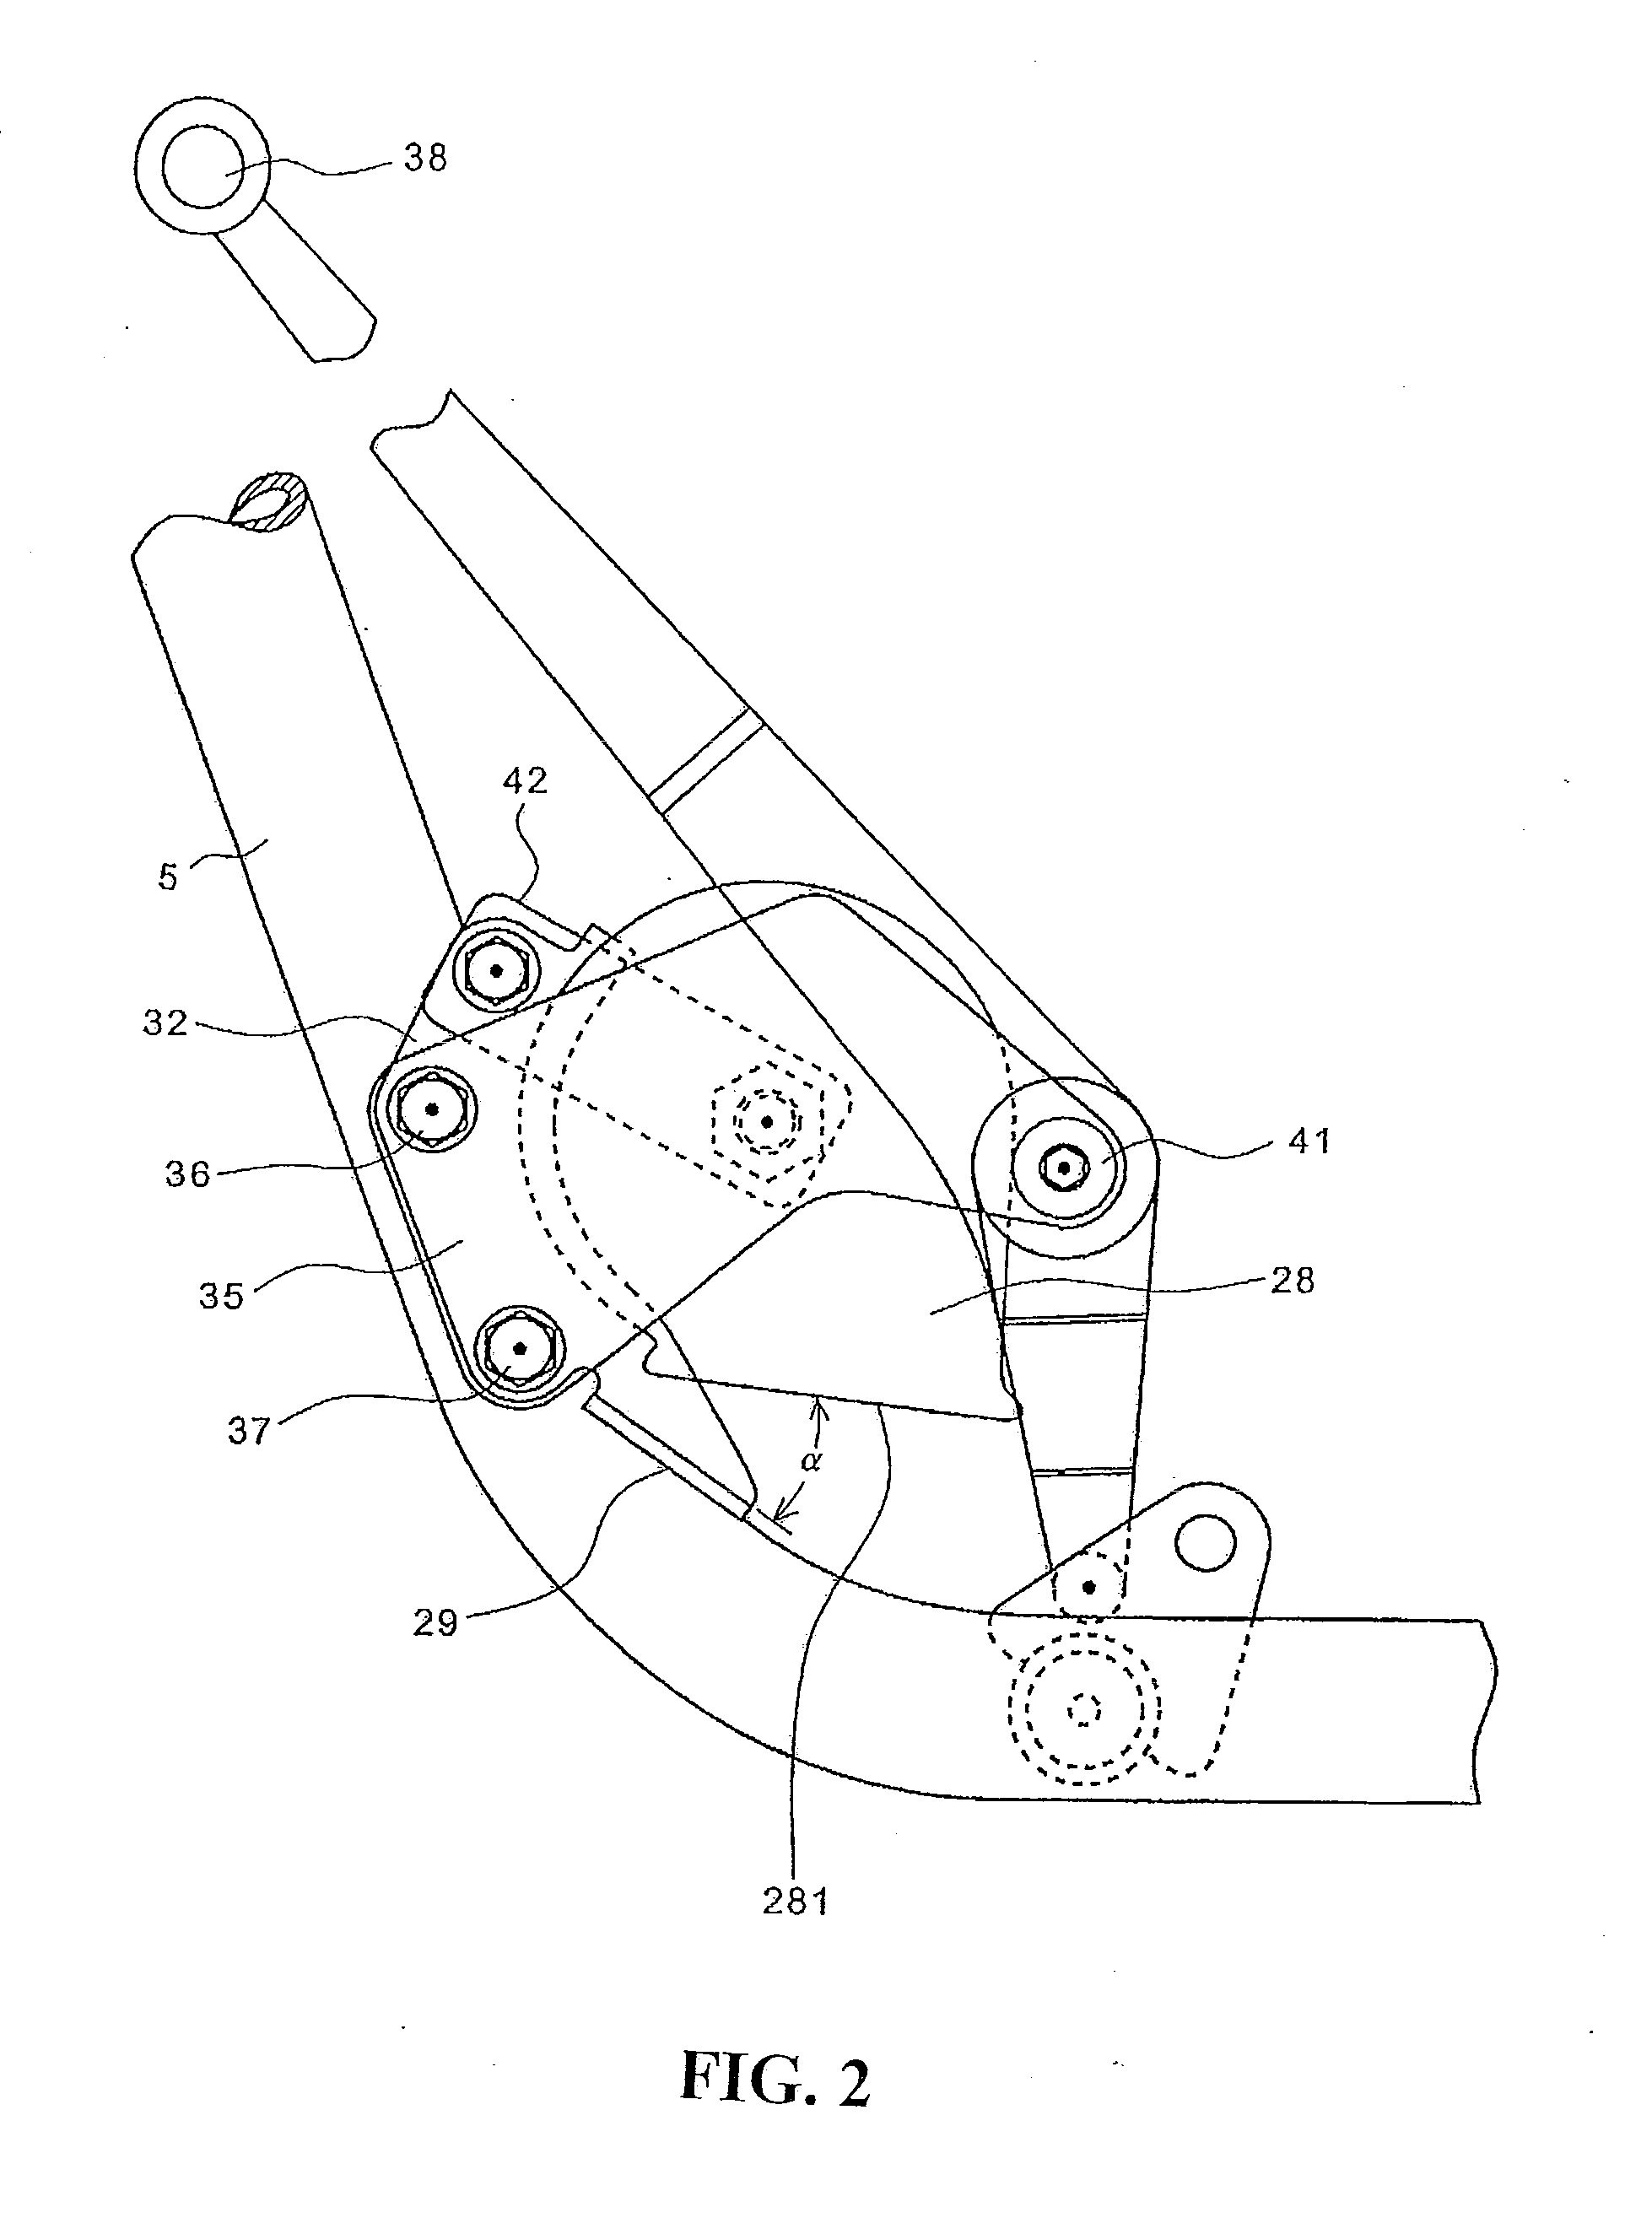 Horn guard device for motorcycle